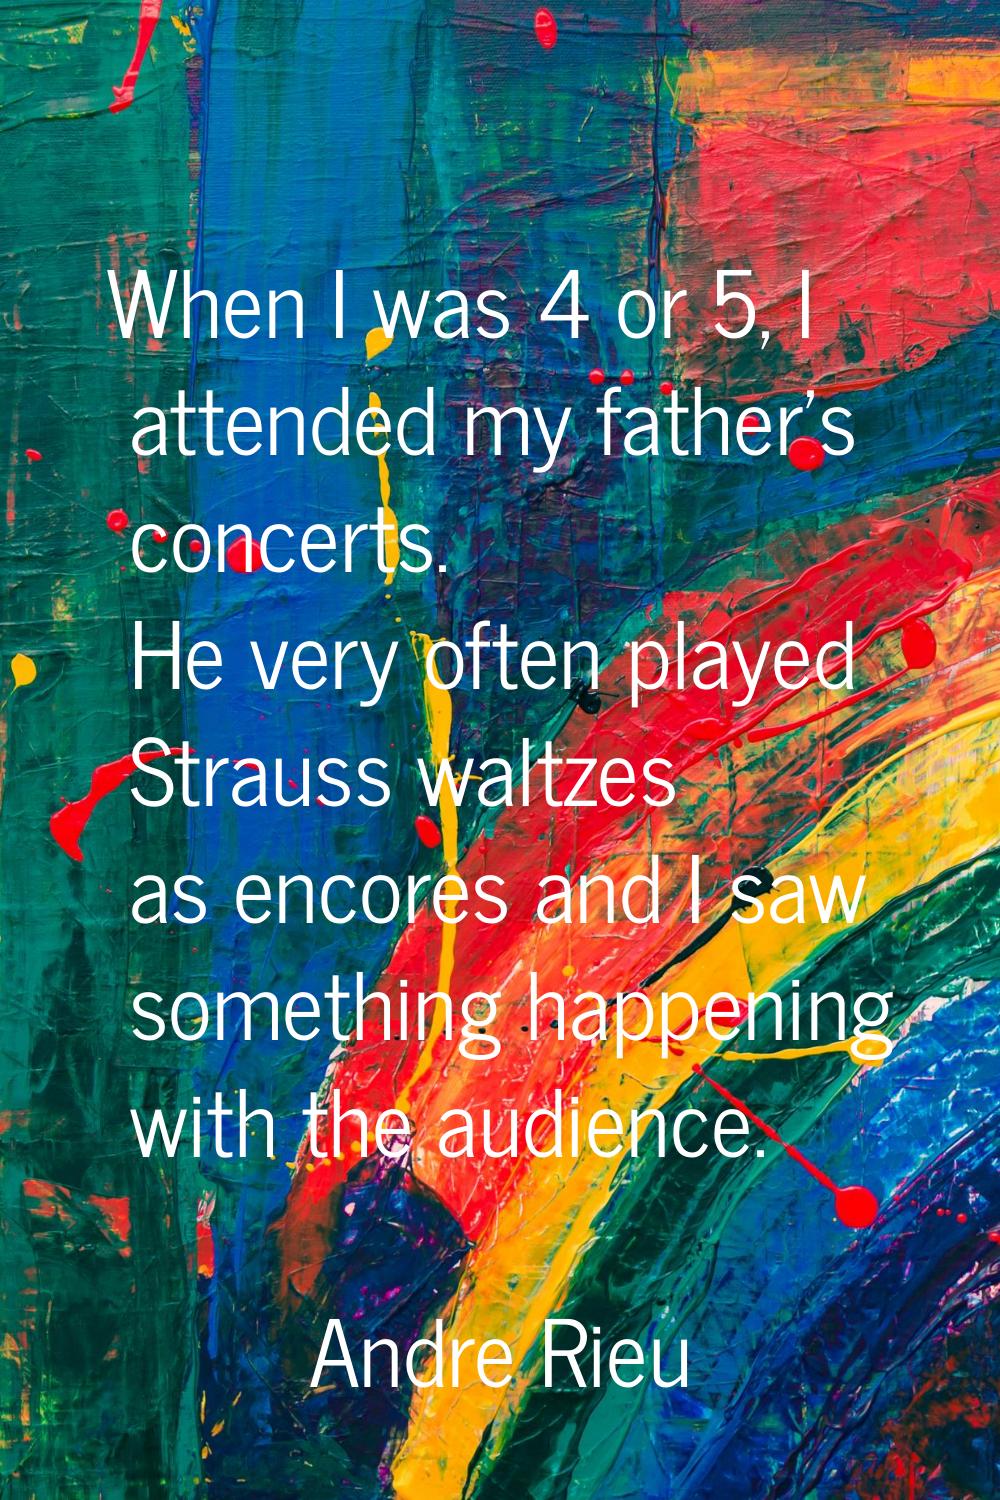 When I was 4 or 5, I attended my father's concerts. He very often played Strauss waltzes as encores